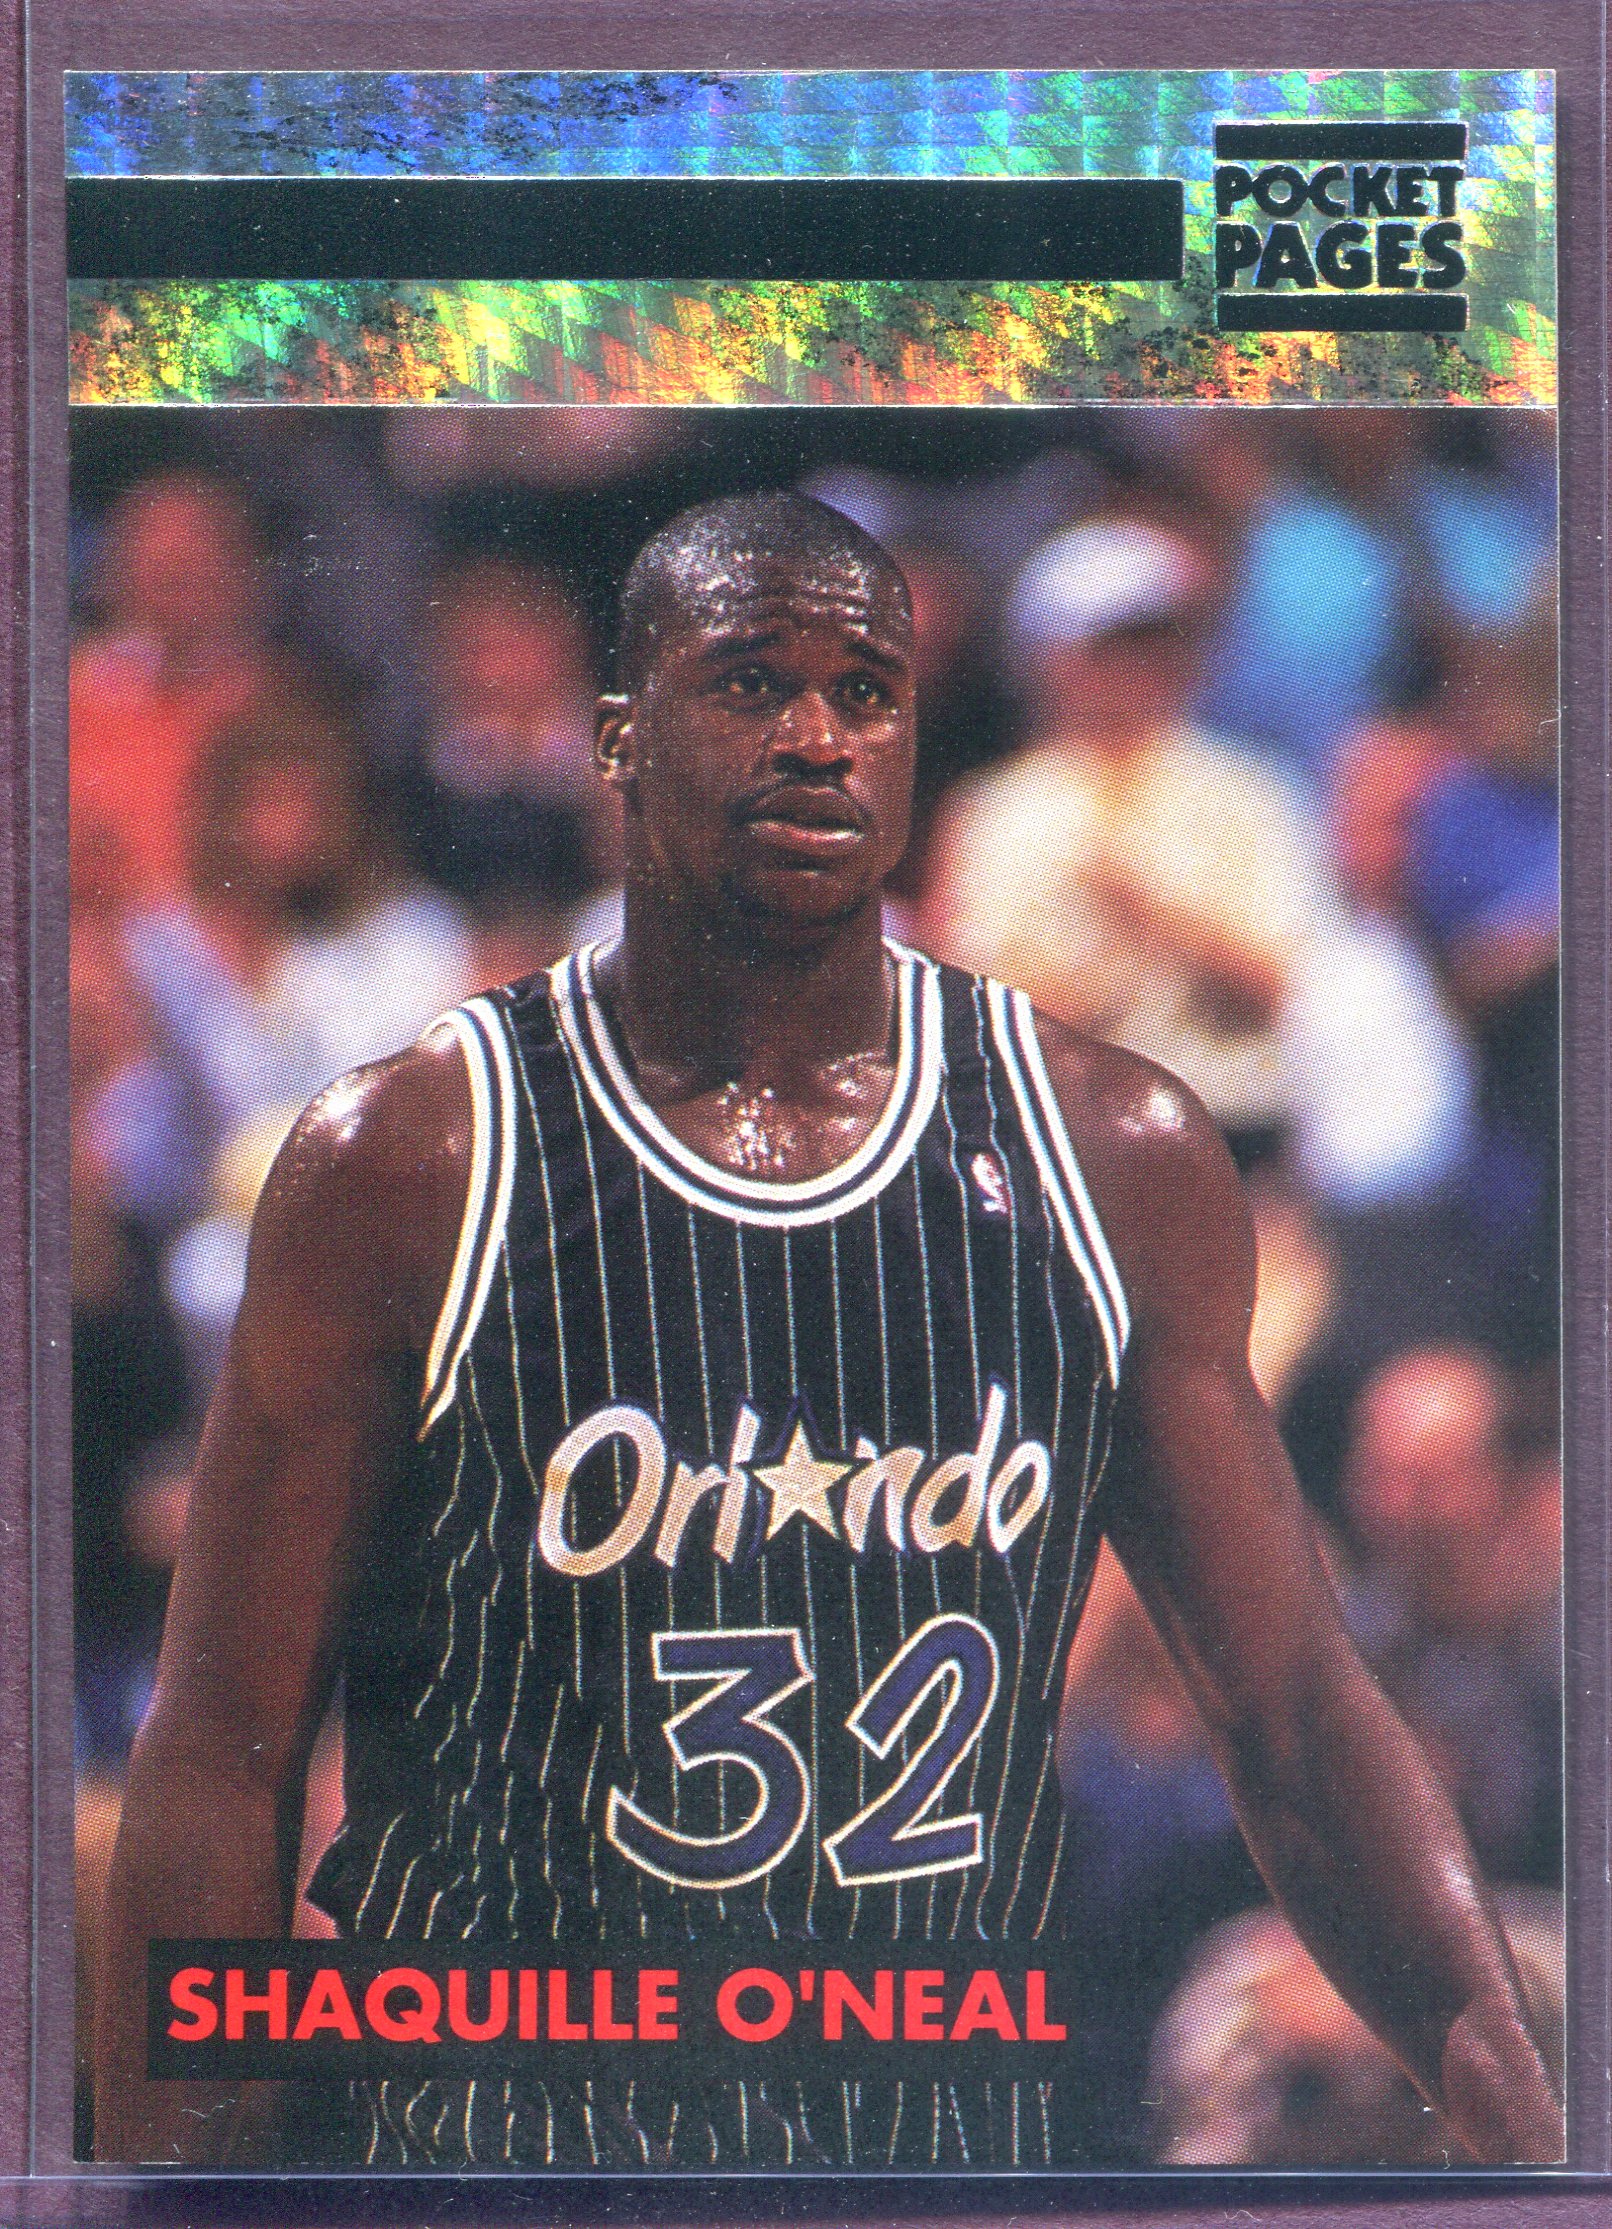 SHAQUILLE O'NEAL ~ 1993 Pocket Pages Trading Card #44 (Typical Silver ...